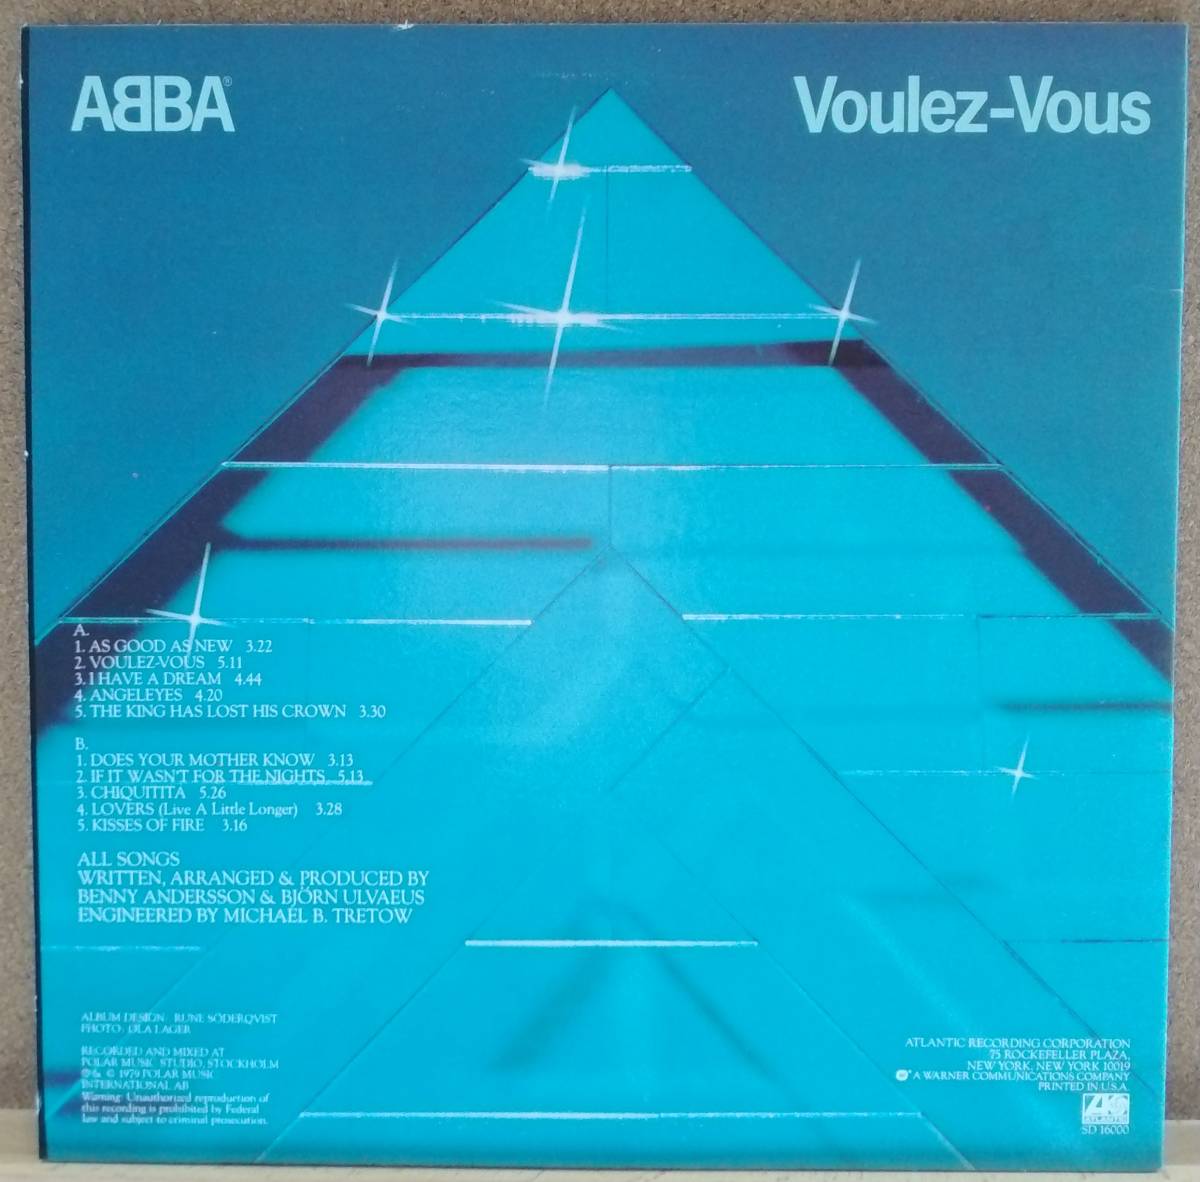 LP(US輸入盤) アバ ABBA / ヴーレ・ヴー VOULEZ-VOUS【同梱可能6枚まで】0522の画像2